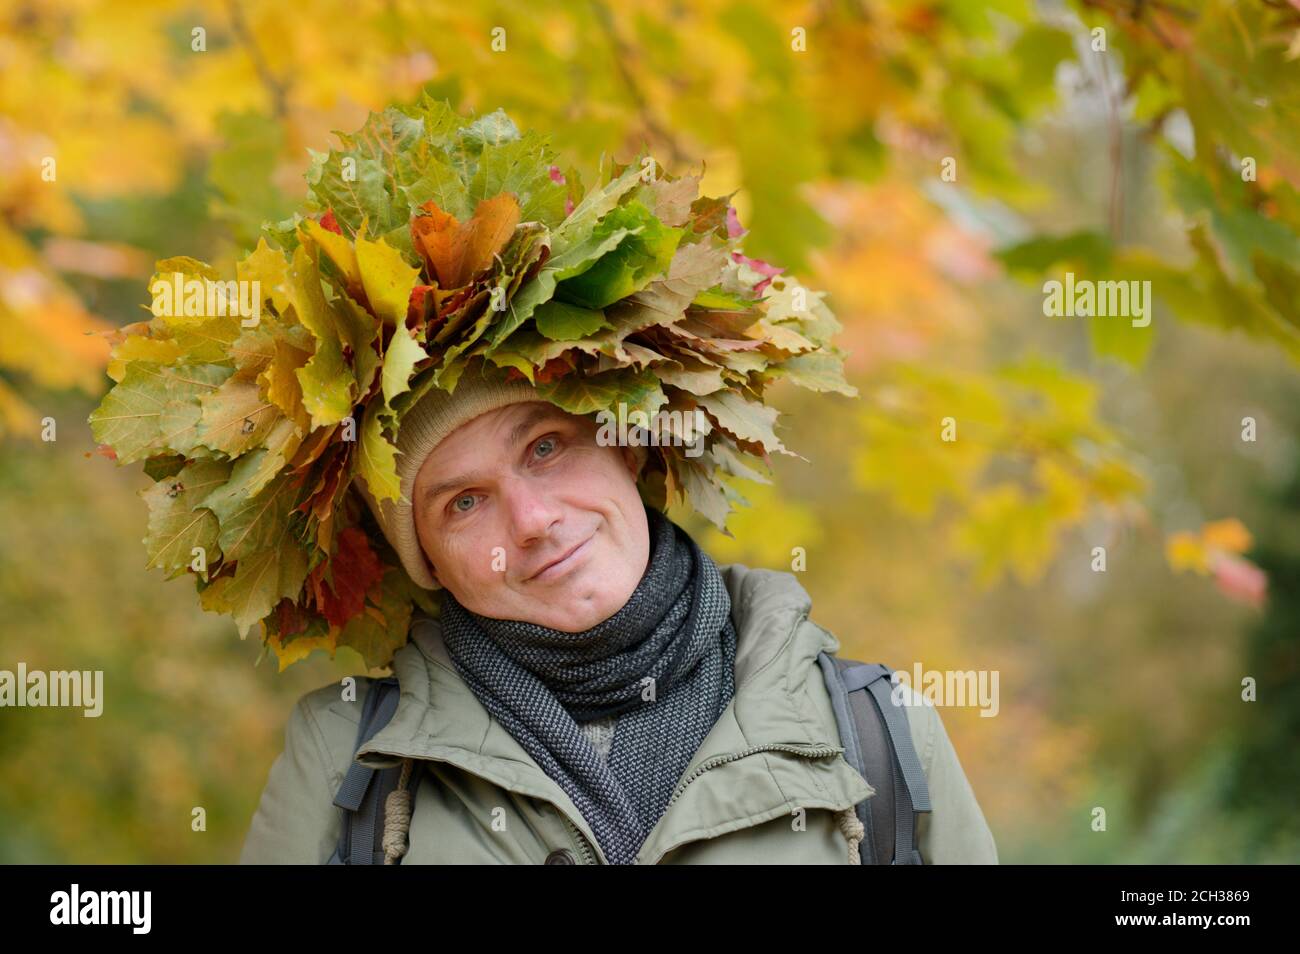 Man in autumn wreath with red and orange leaves looking to the camera Stock Photo